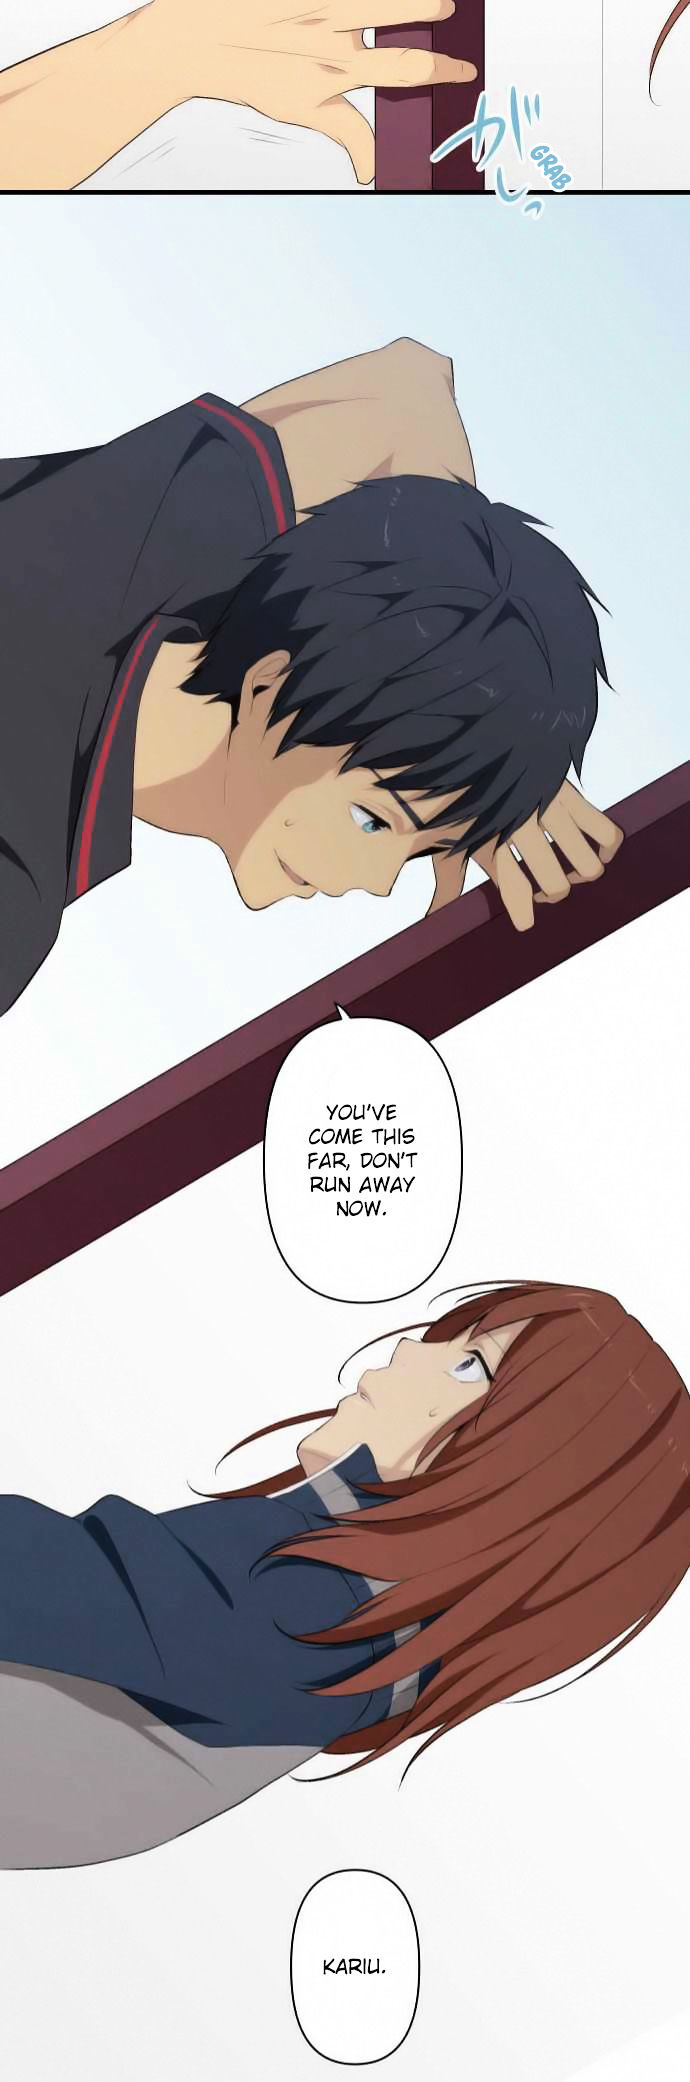 Relife 79 21